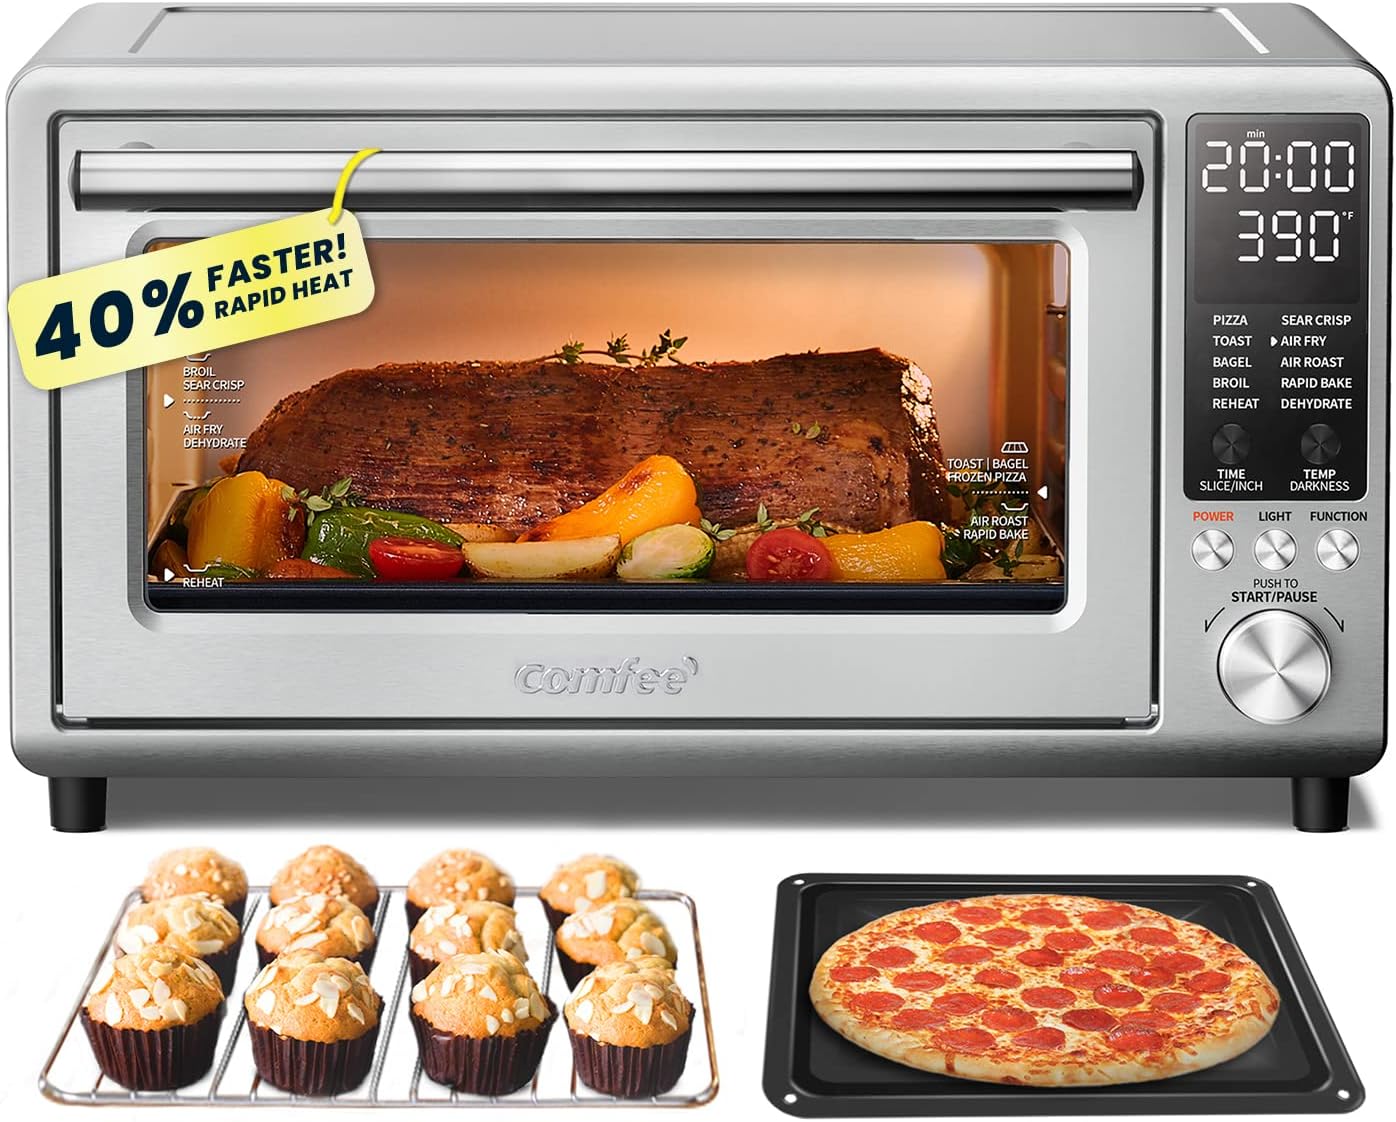 COMFEE’ Toaster Oven Air Fryer FLASHWAVE™ Rapid-Heat Technology Review